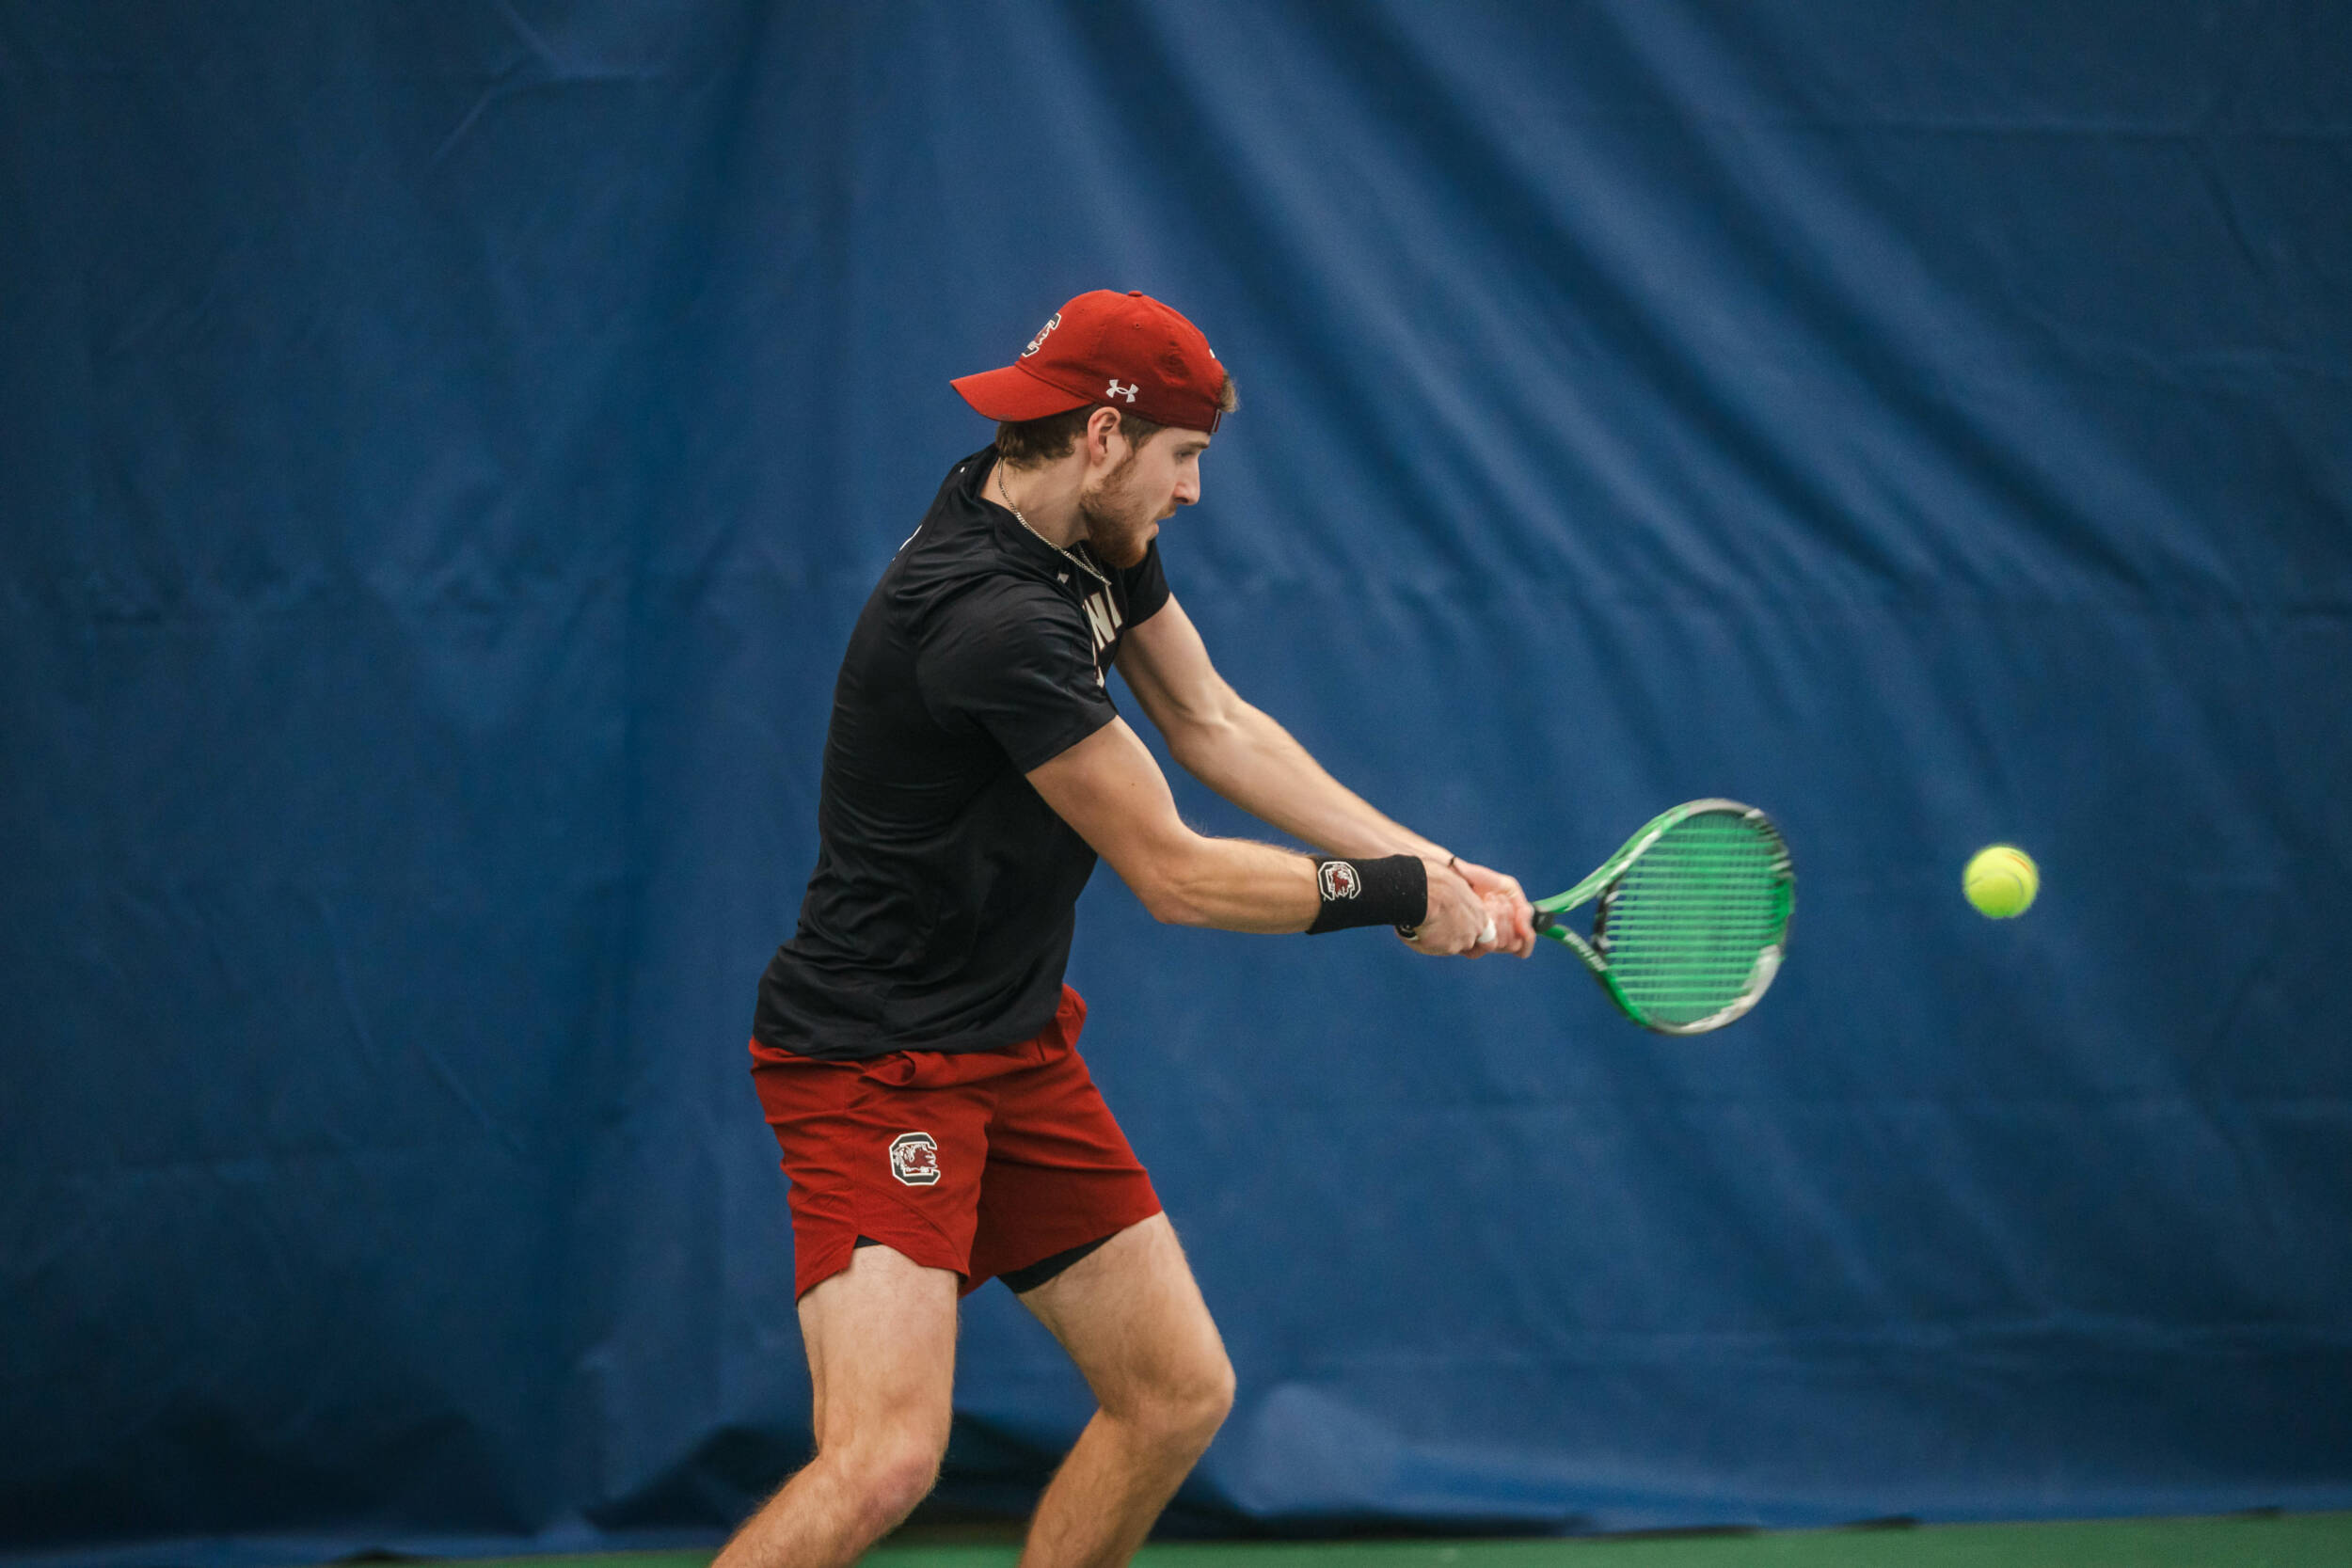 Samuel, Hoole Record Top-5 Doubles Upset in Loss to No. 3 Texas